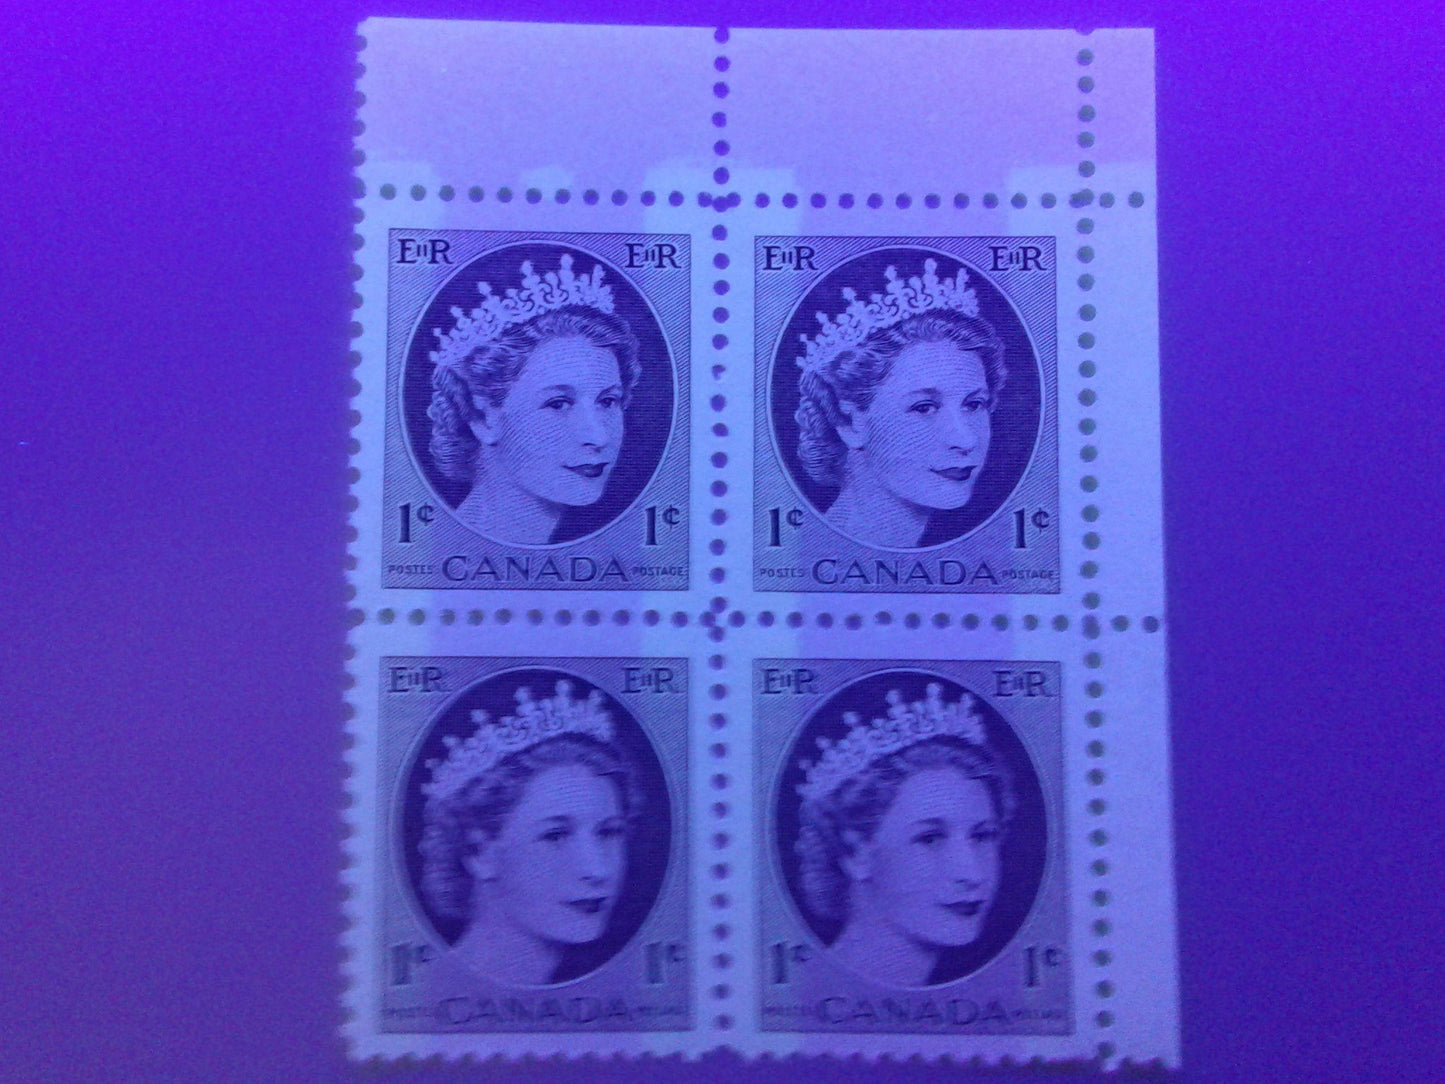 Canada #337p(var) 1c Chocolate Queen Elizabeth II, 1954-1962 Wilding Issue, Upper Right Blank Winnipeg Tagged Blocks of 4, Three Different, Various Perfs., DF Gr Vertically Ribbed Paper, Streaky Semi Gloss Gum, Bluish White Tagging With Extra Spot, VFNH Brixton Chrome 